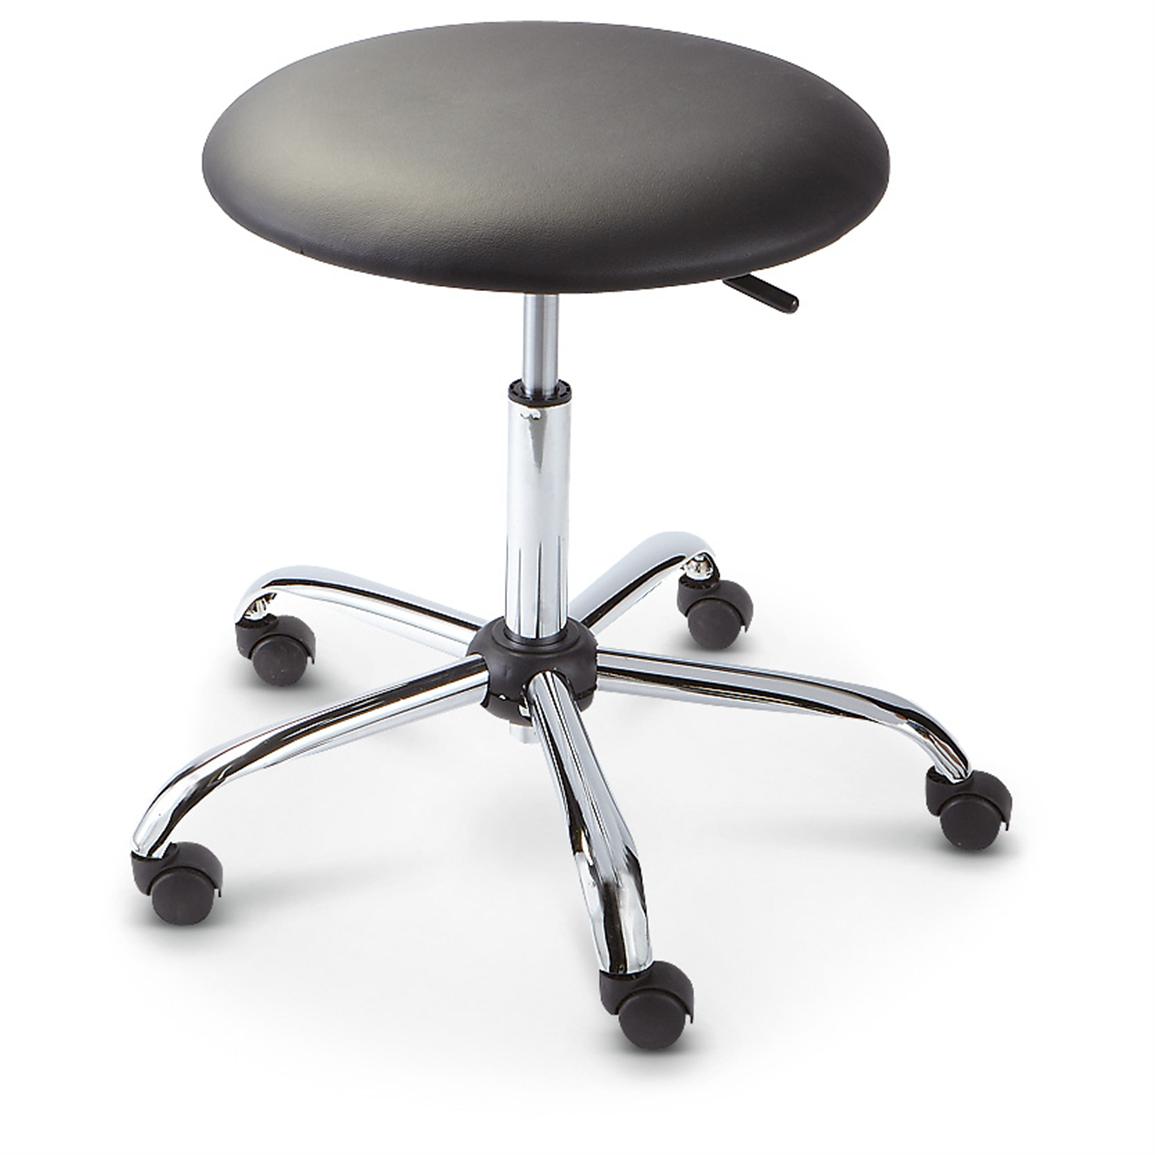 CASTLECREEK™ Extra-large Adjustable-height Stool - 229127, Kitchen & Dining at ...1155 x 1155